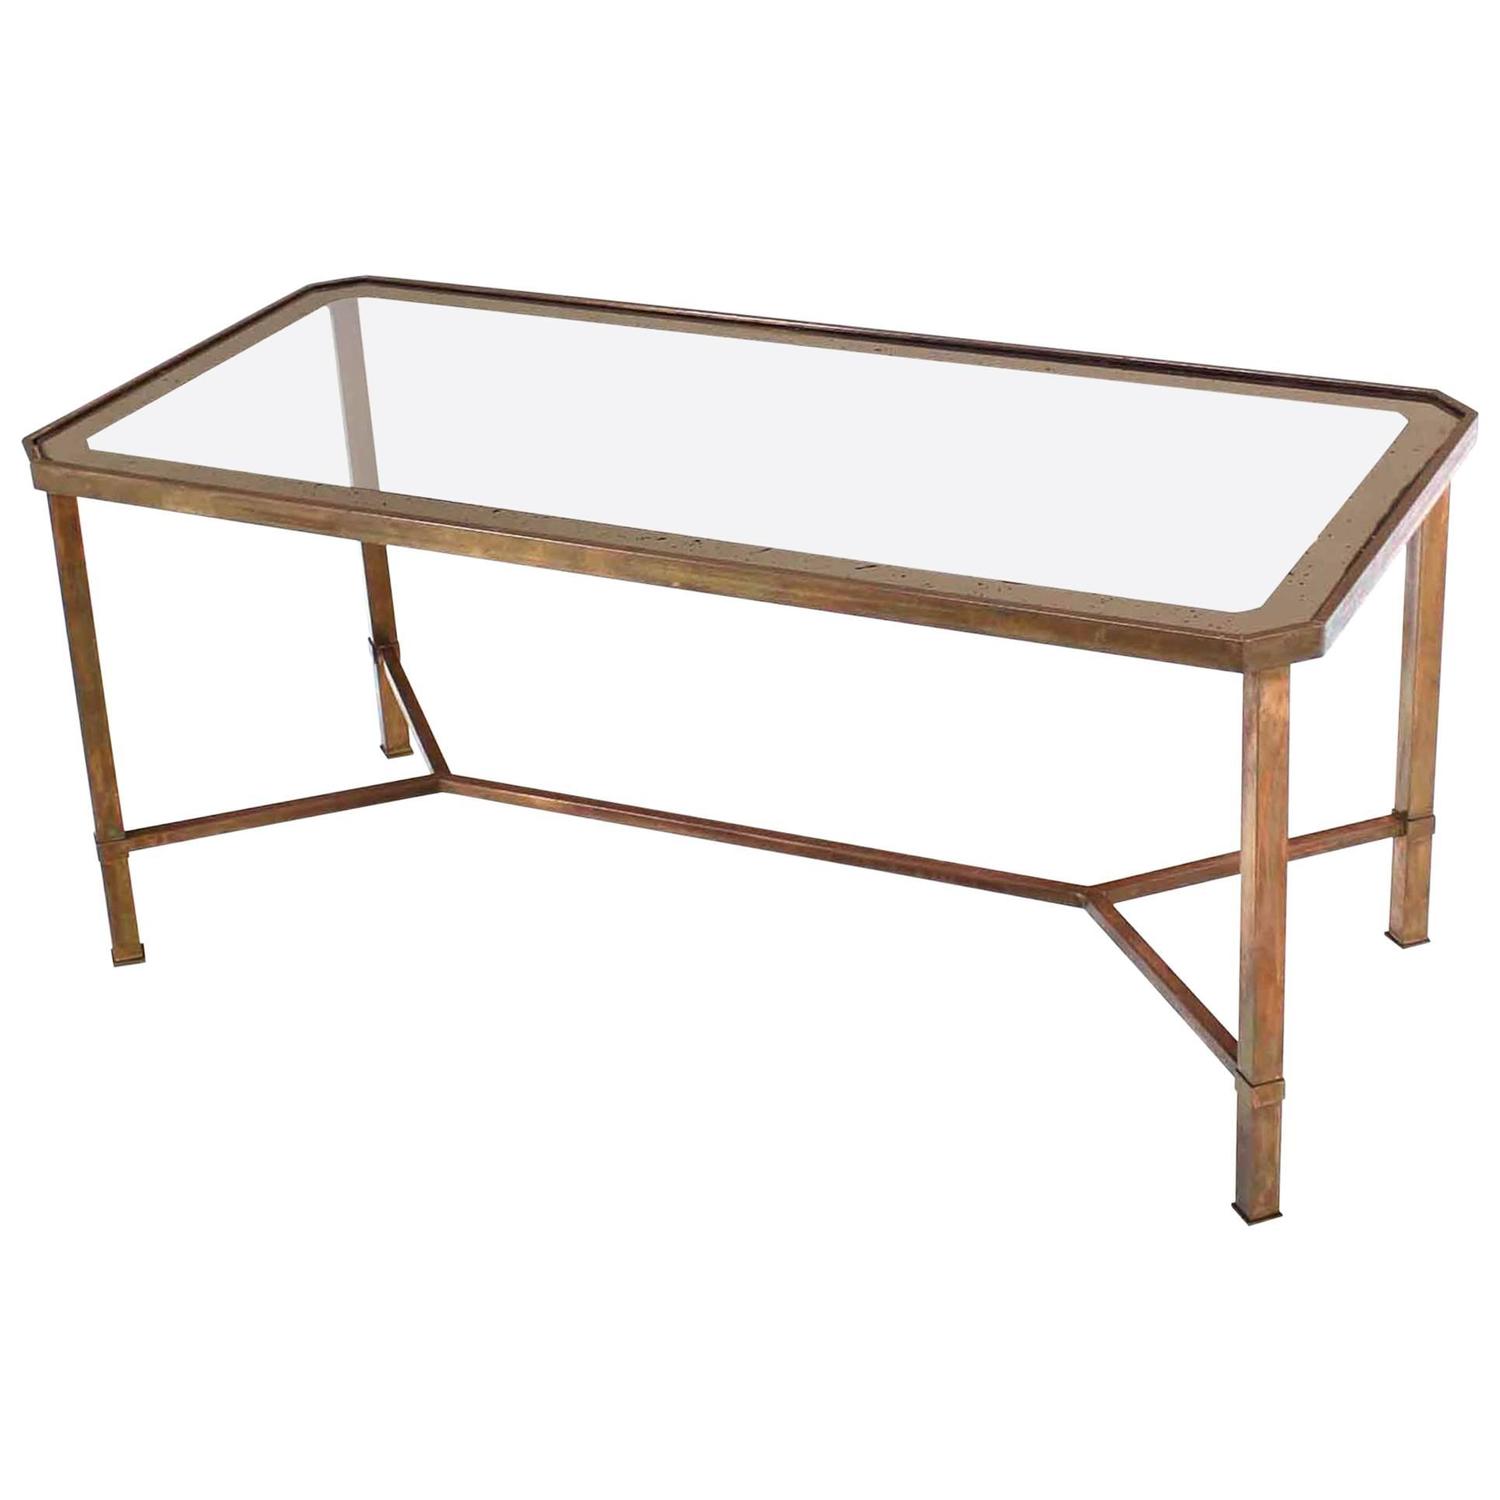 Rectangular Brass Base Coffee Table For Sale at 1stdibs